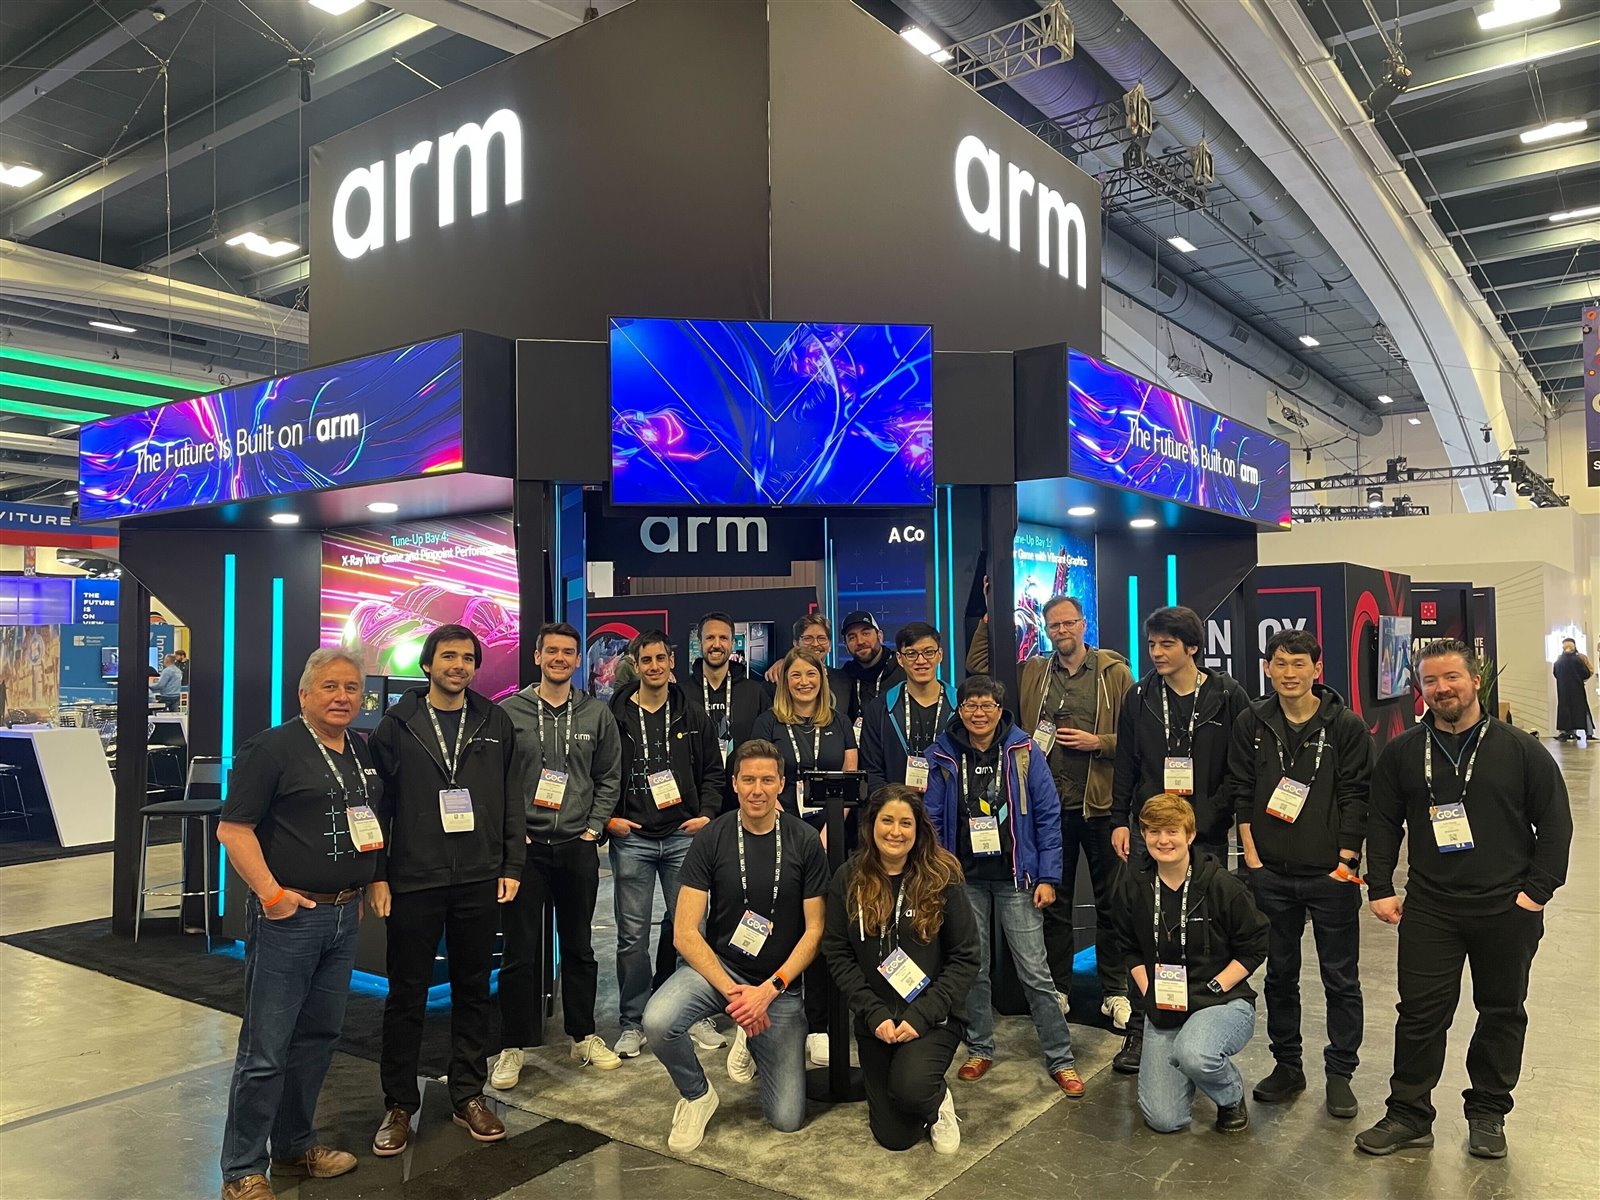 An image of the Arm team at GDC 2023